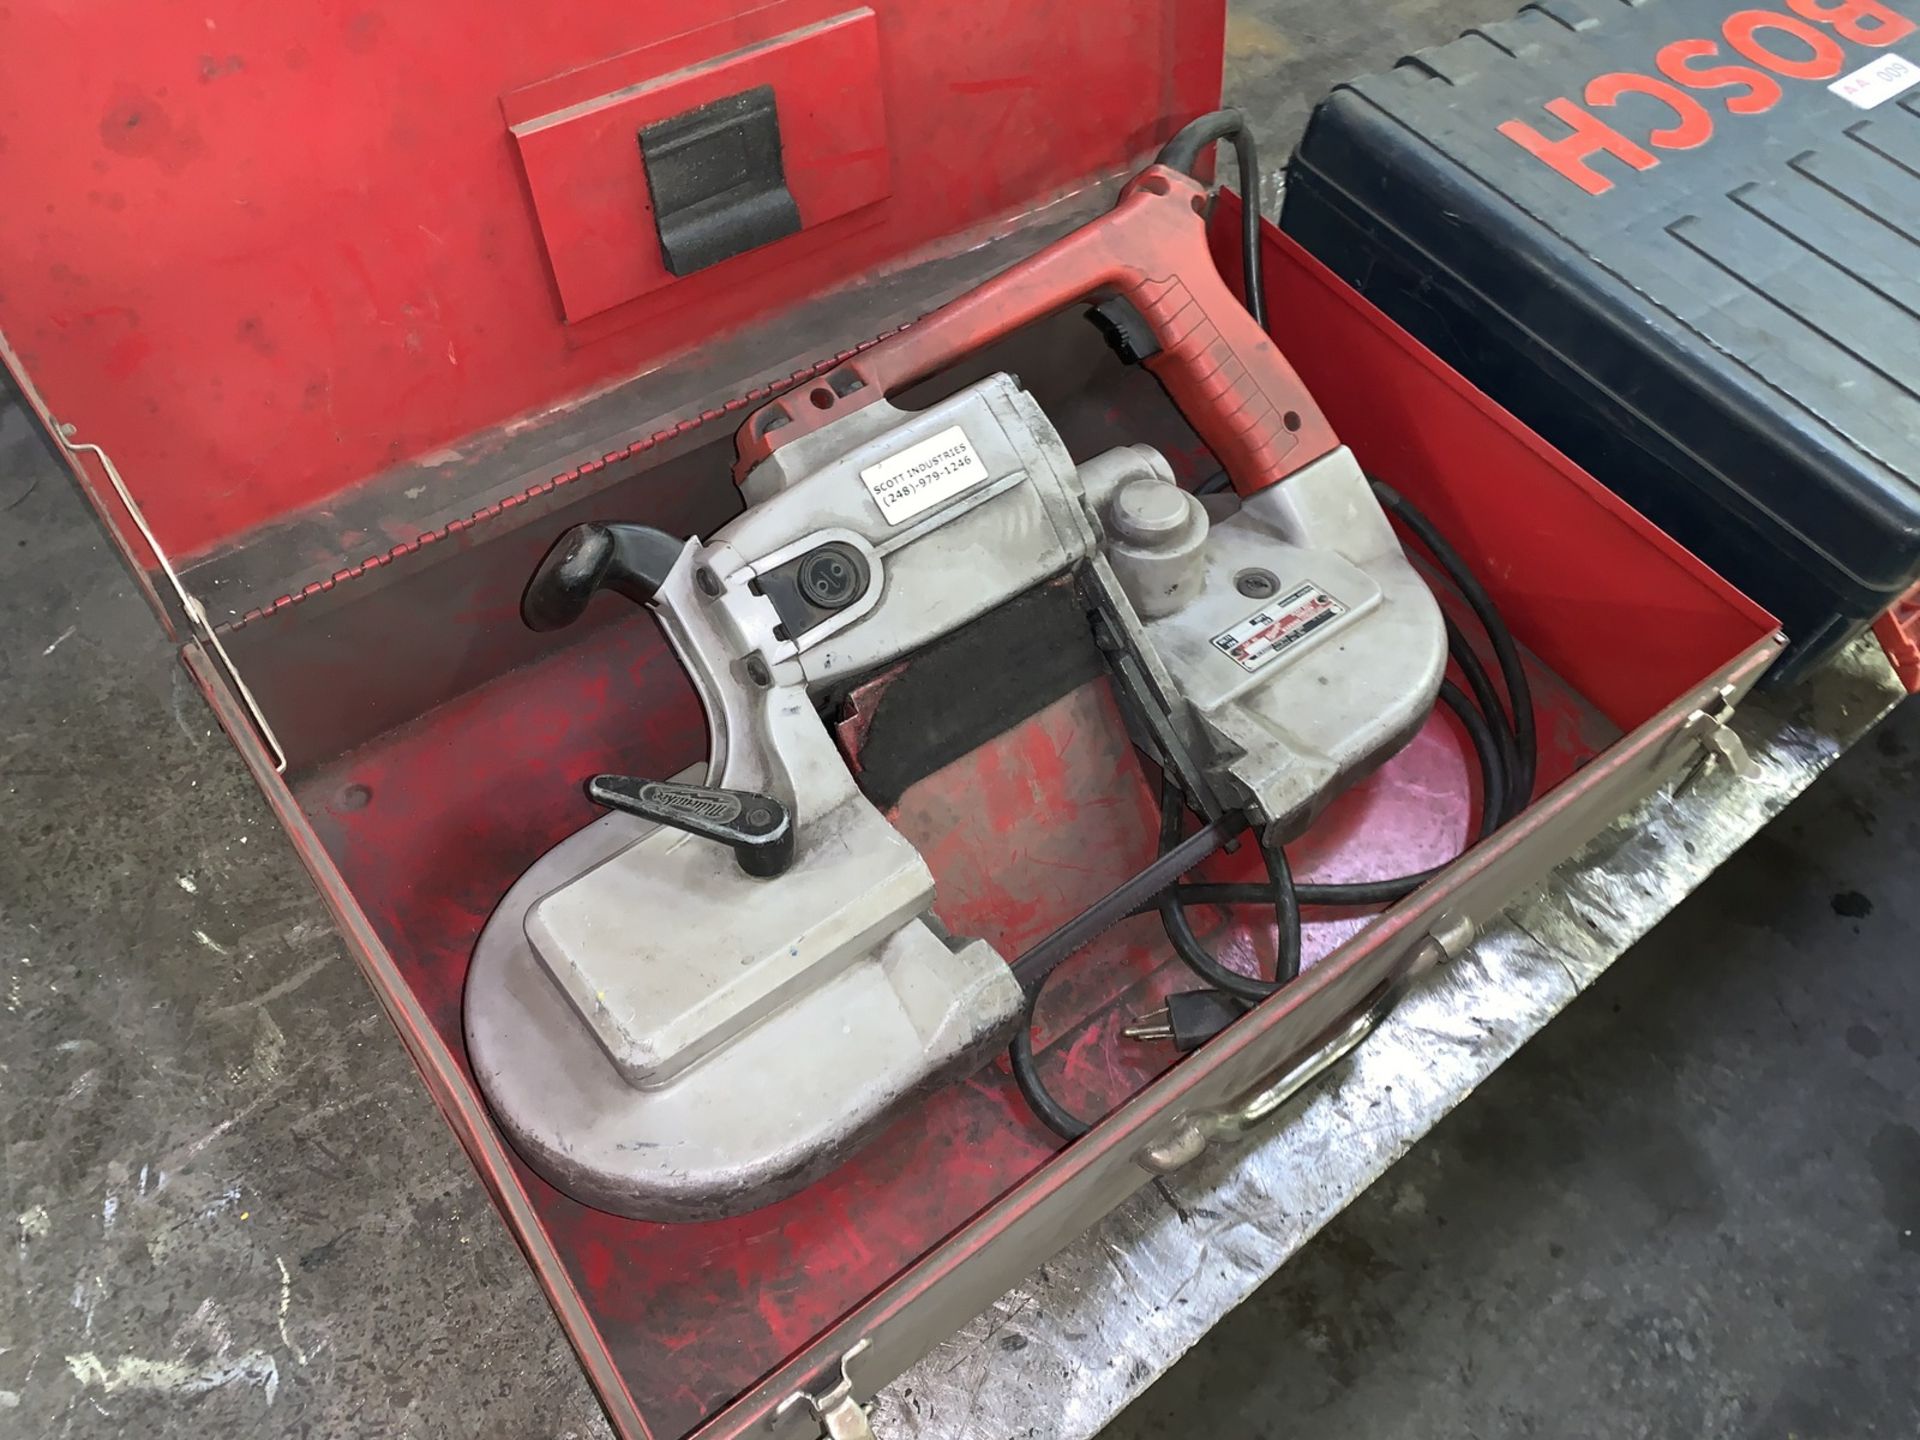 Milwaukee Mdl. 6230 Portable Band Saw with Case (All Items MUST be Removed by Thursday, December 19,